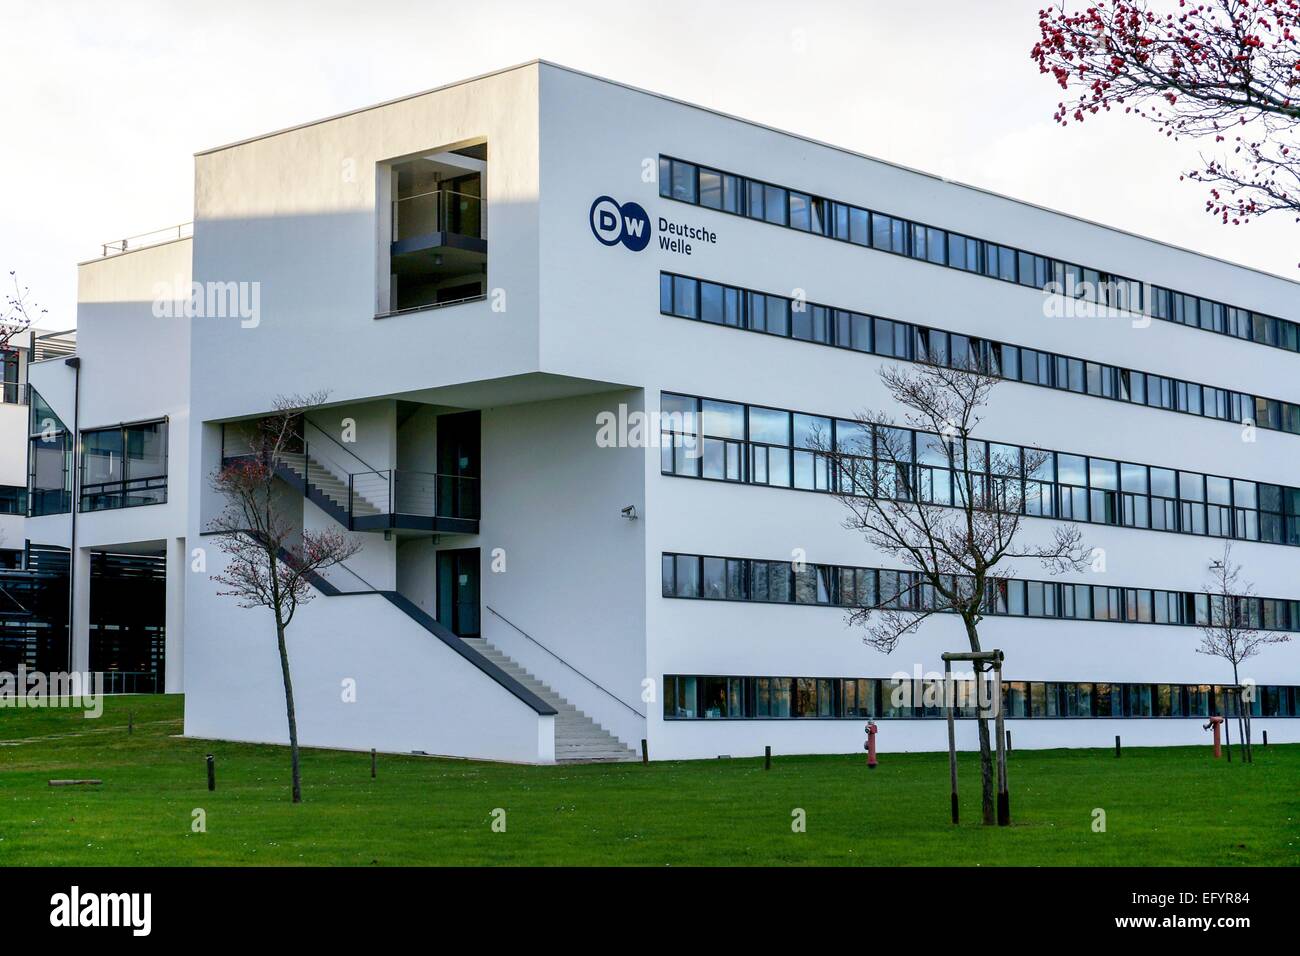 Germany: The Deutsche Welle (Geman broadcaster) building in Bonn. Photo from 02 January 2014. Stock Photo